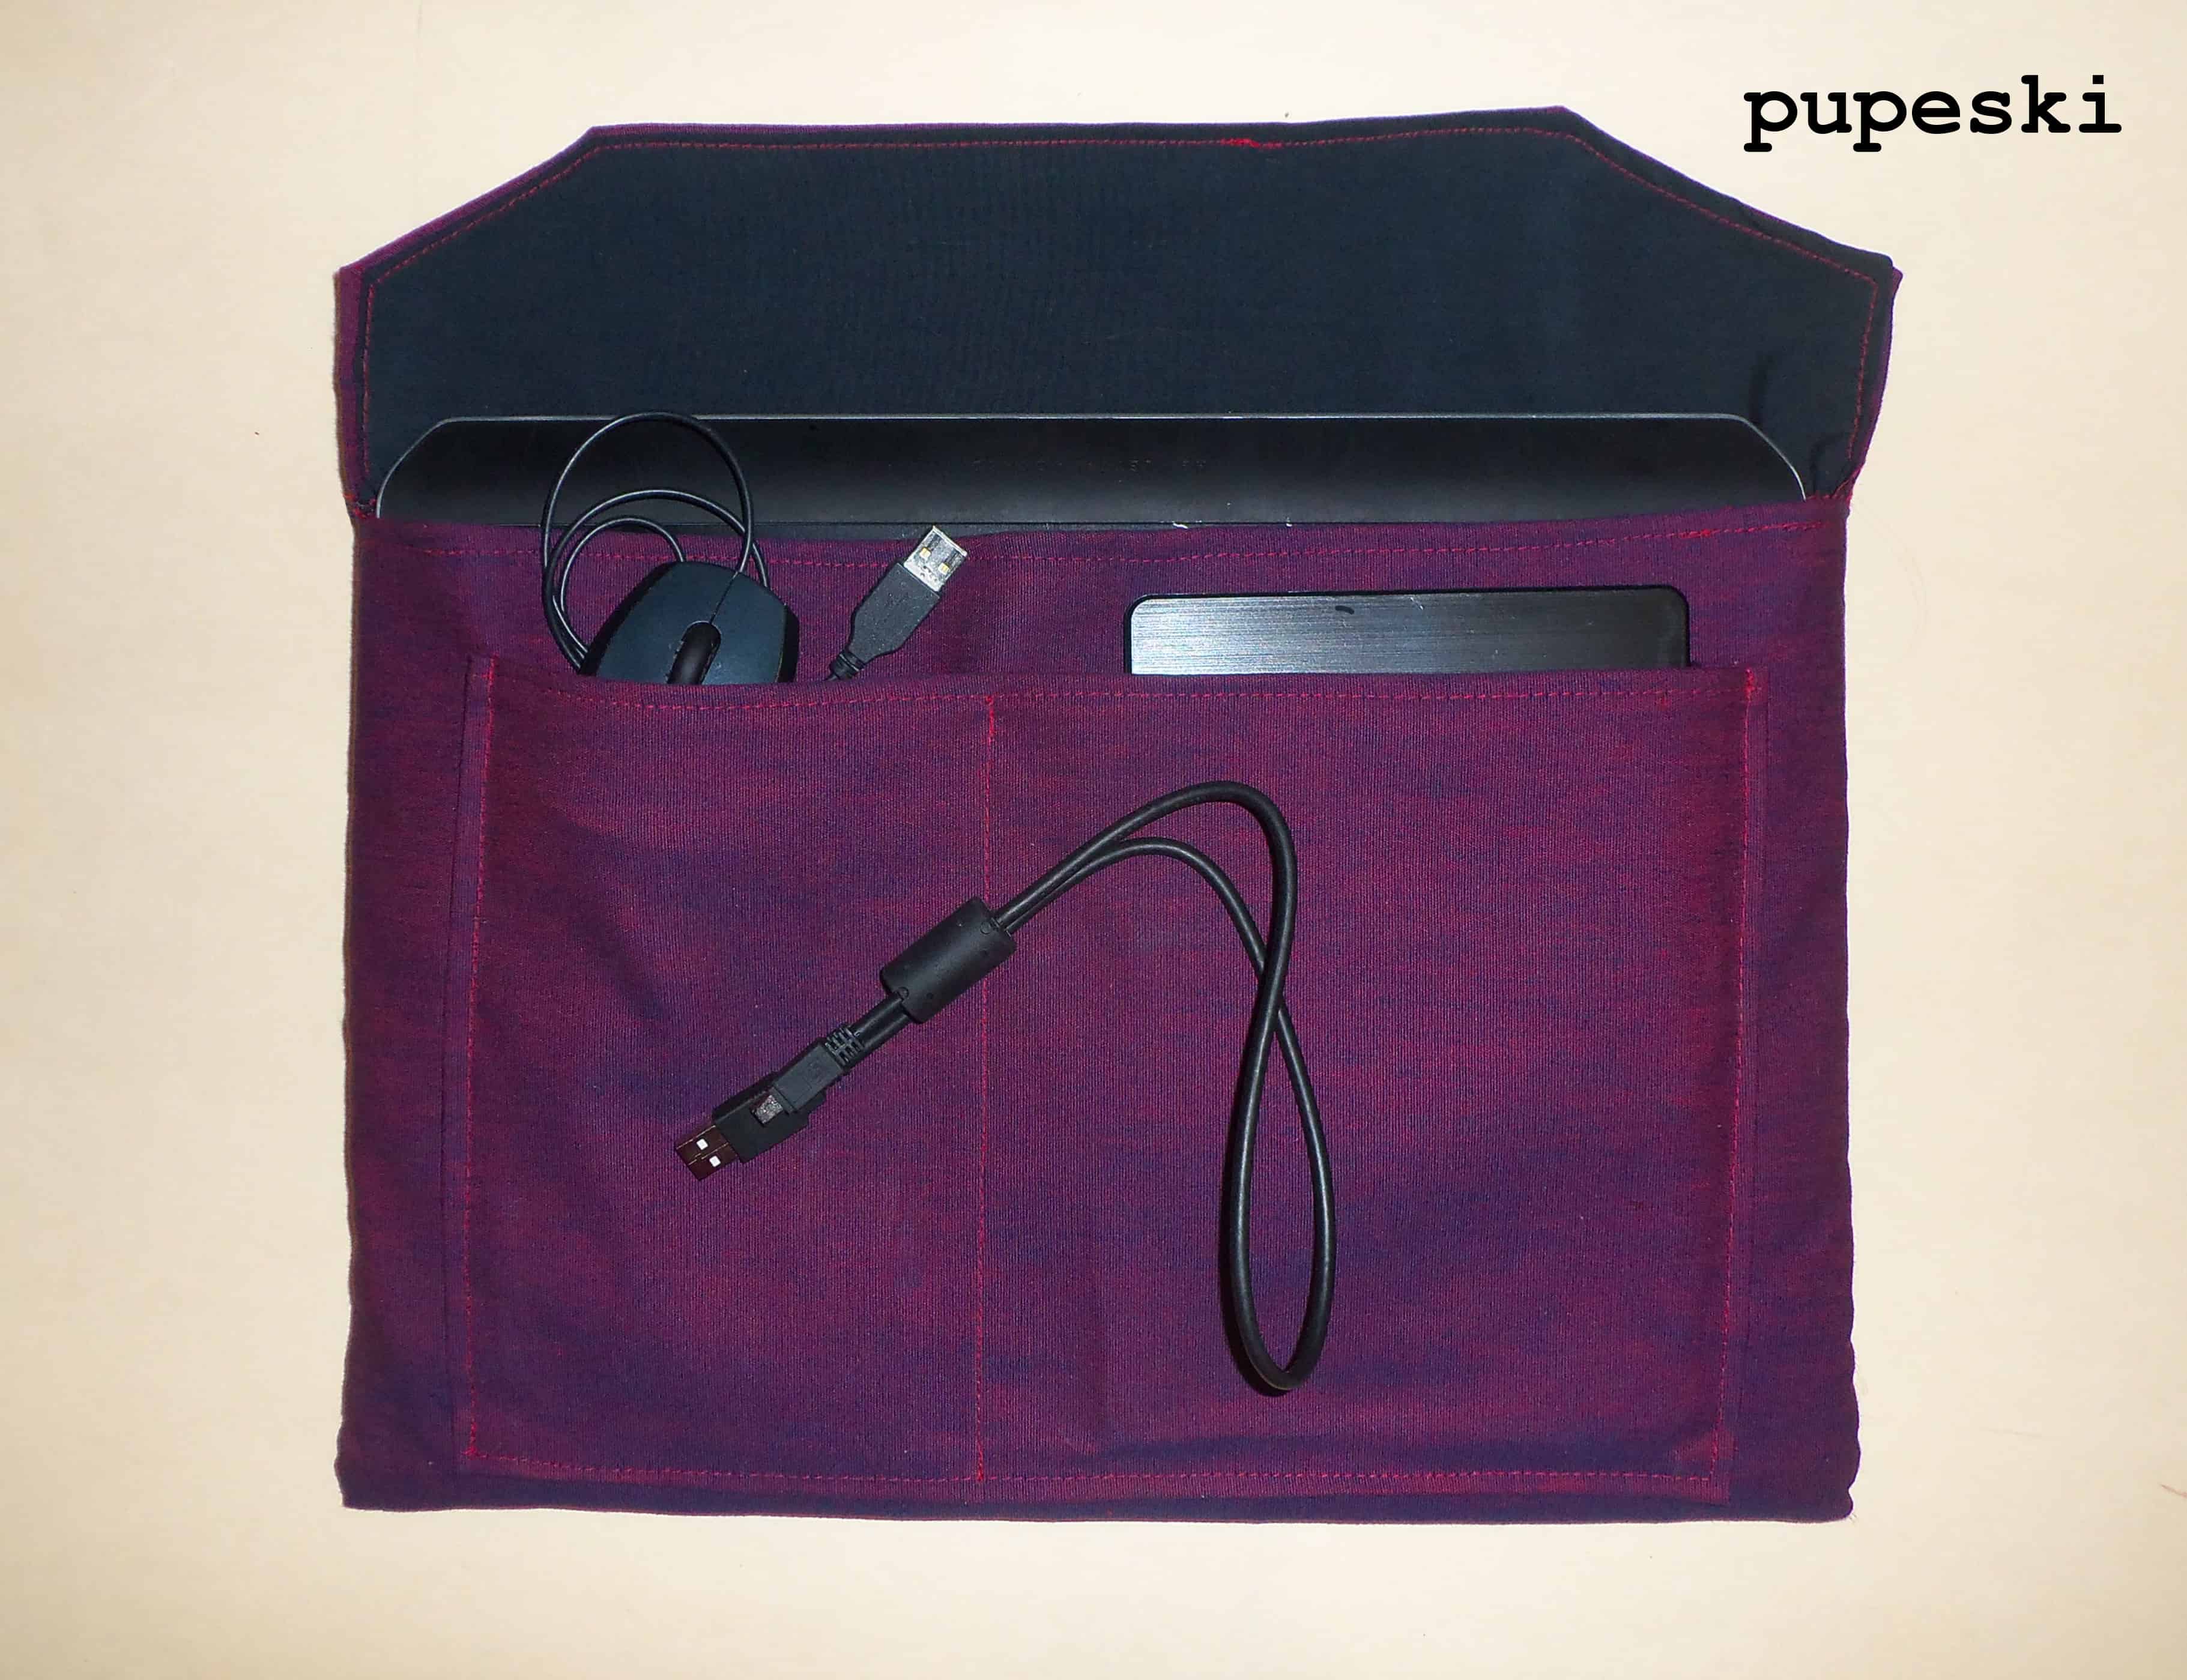 DIY laptop case with accessory pockets